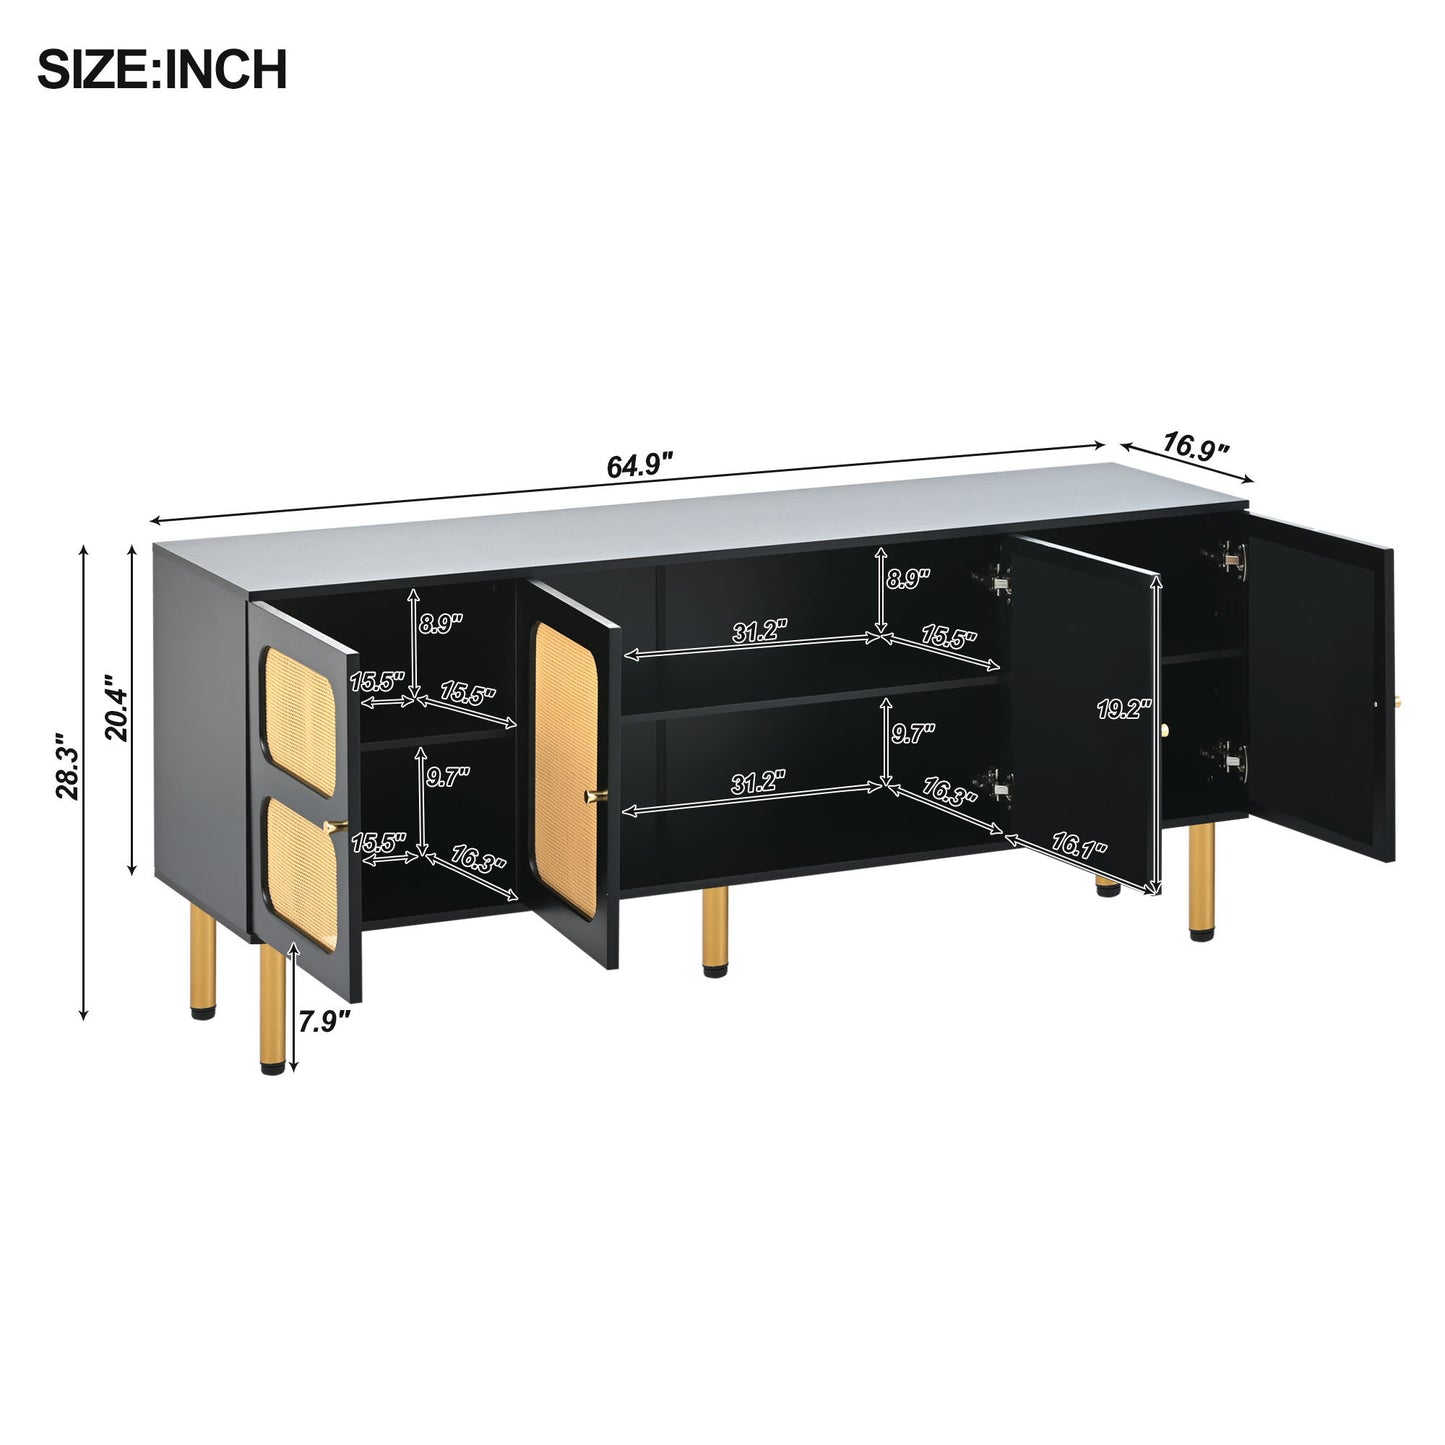 ON-TREND Boho style TV Stand with Rattan Door, Woven Media Console Table for TVs Up to 70'', Country Style Design Side Board with Gold Metal Base for Living Room, Black.